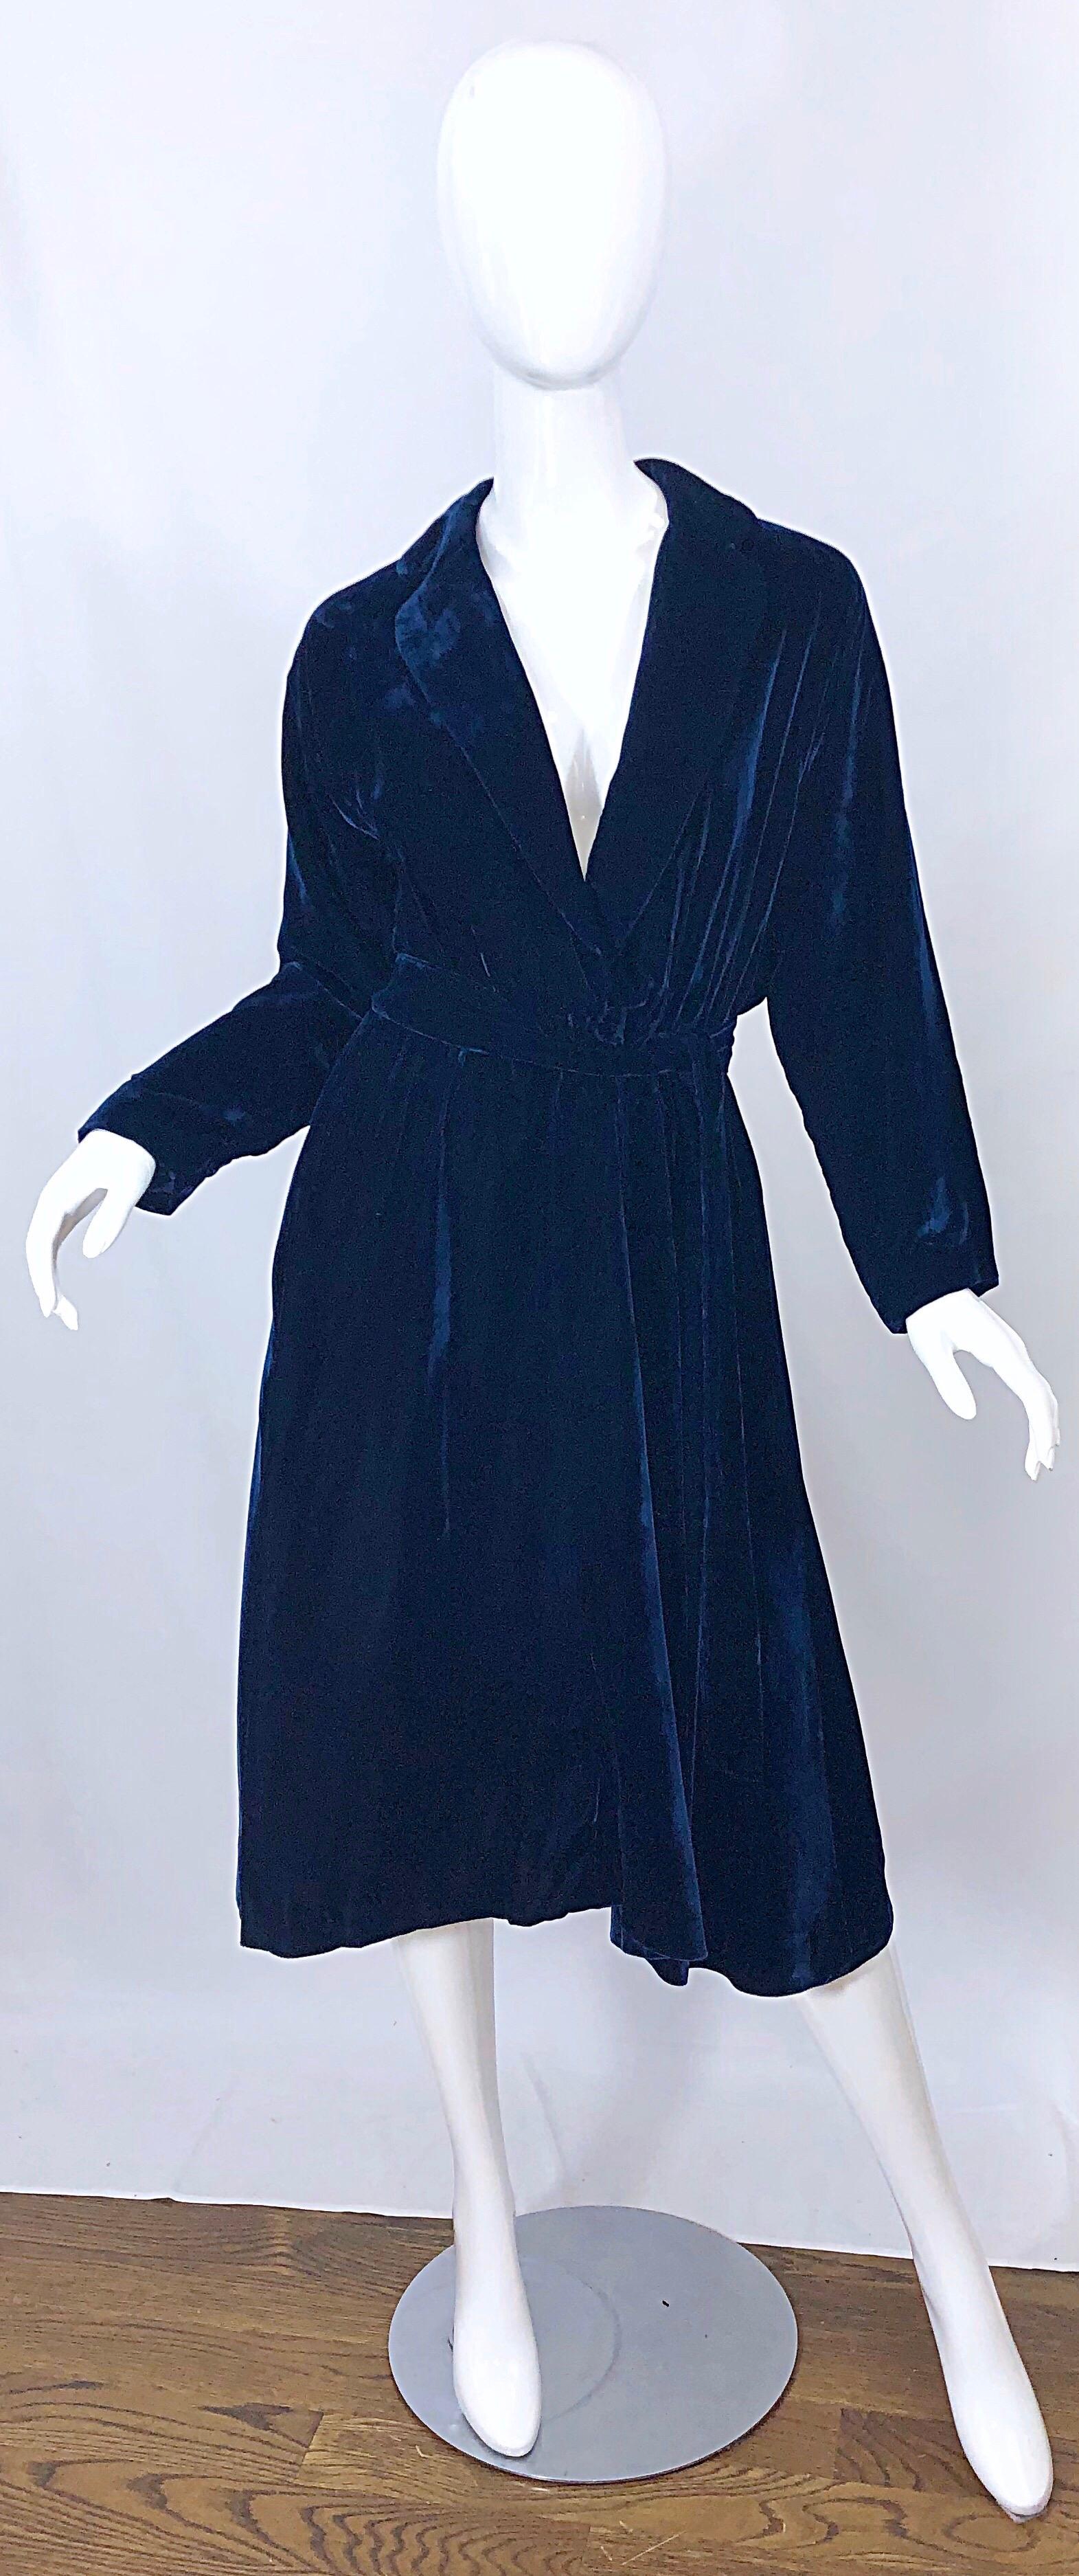 The silk velvet on this amazing 1970s HALSTON midnight navy blue faux wrap dress is the most luxurious velvets that I have ever felt! I can only imagine how incredible it feels on (it is lined in black chiffon). The midnight blue is a fabulous